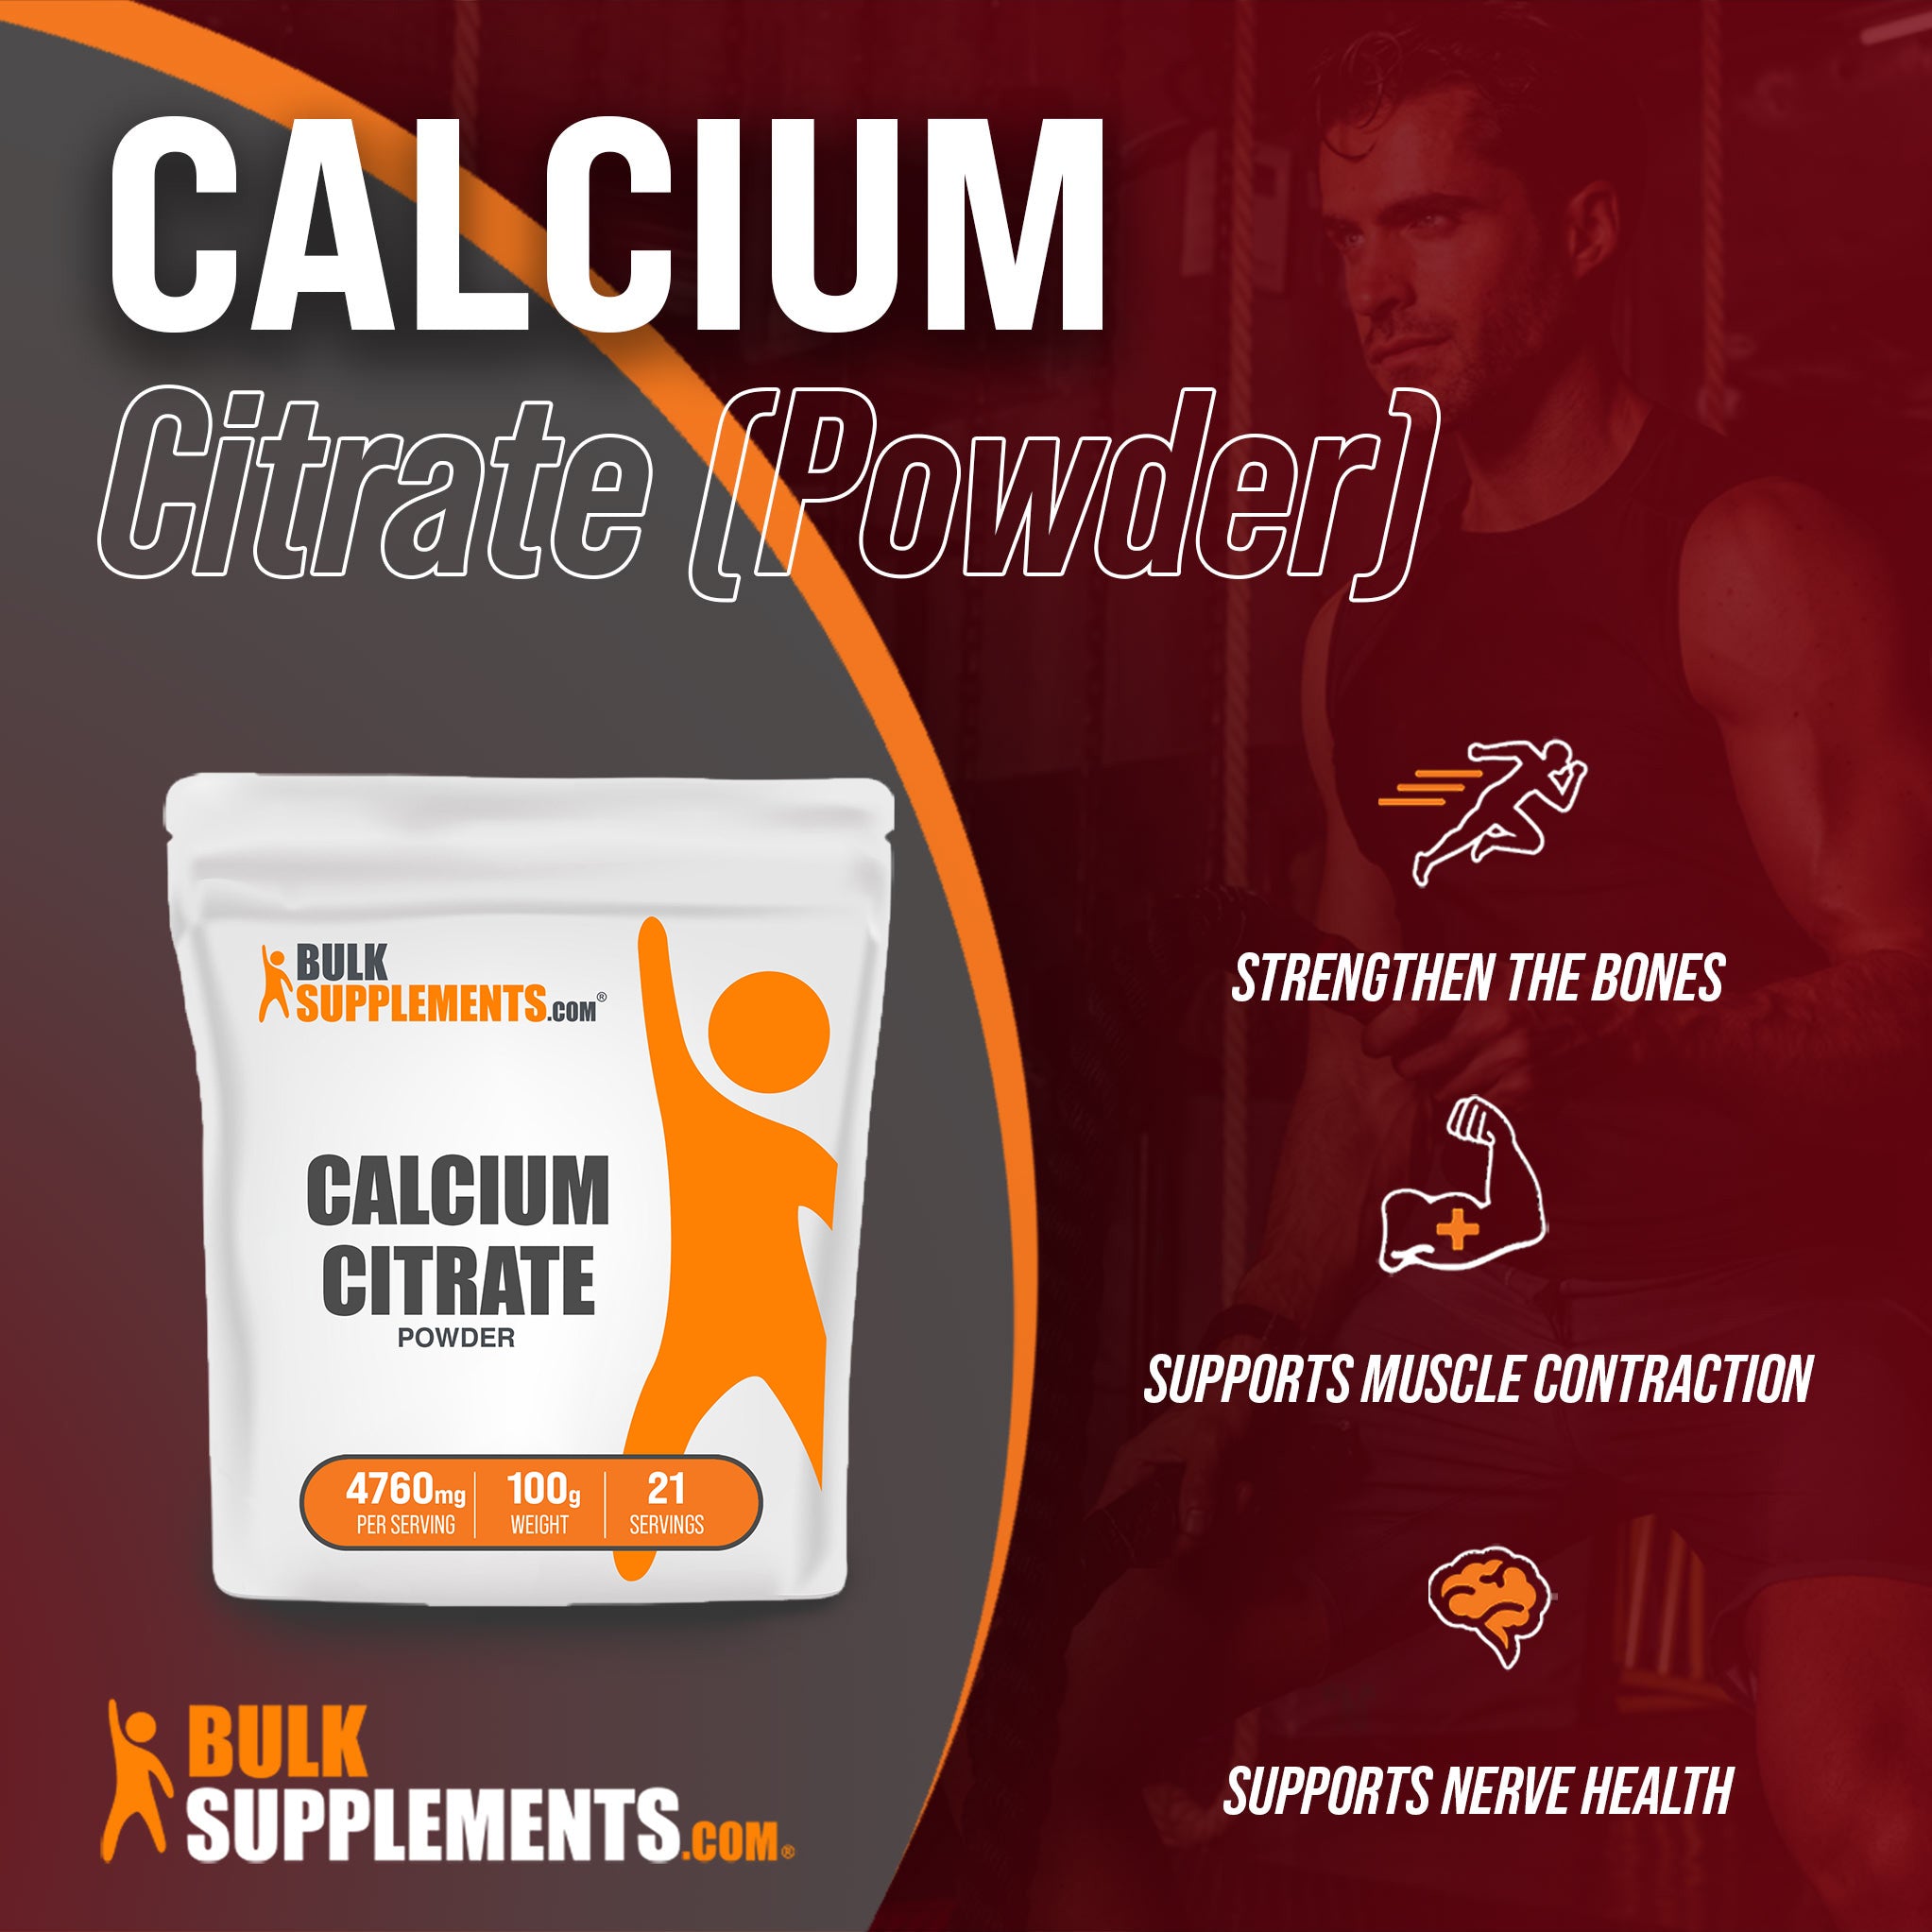 Benefits of Calcium Citrate Powder; strengthen the bones, supports muscle contraction, supports nerve health